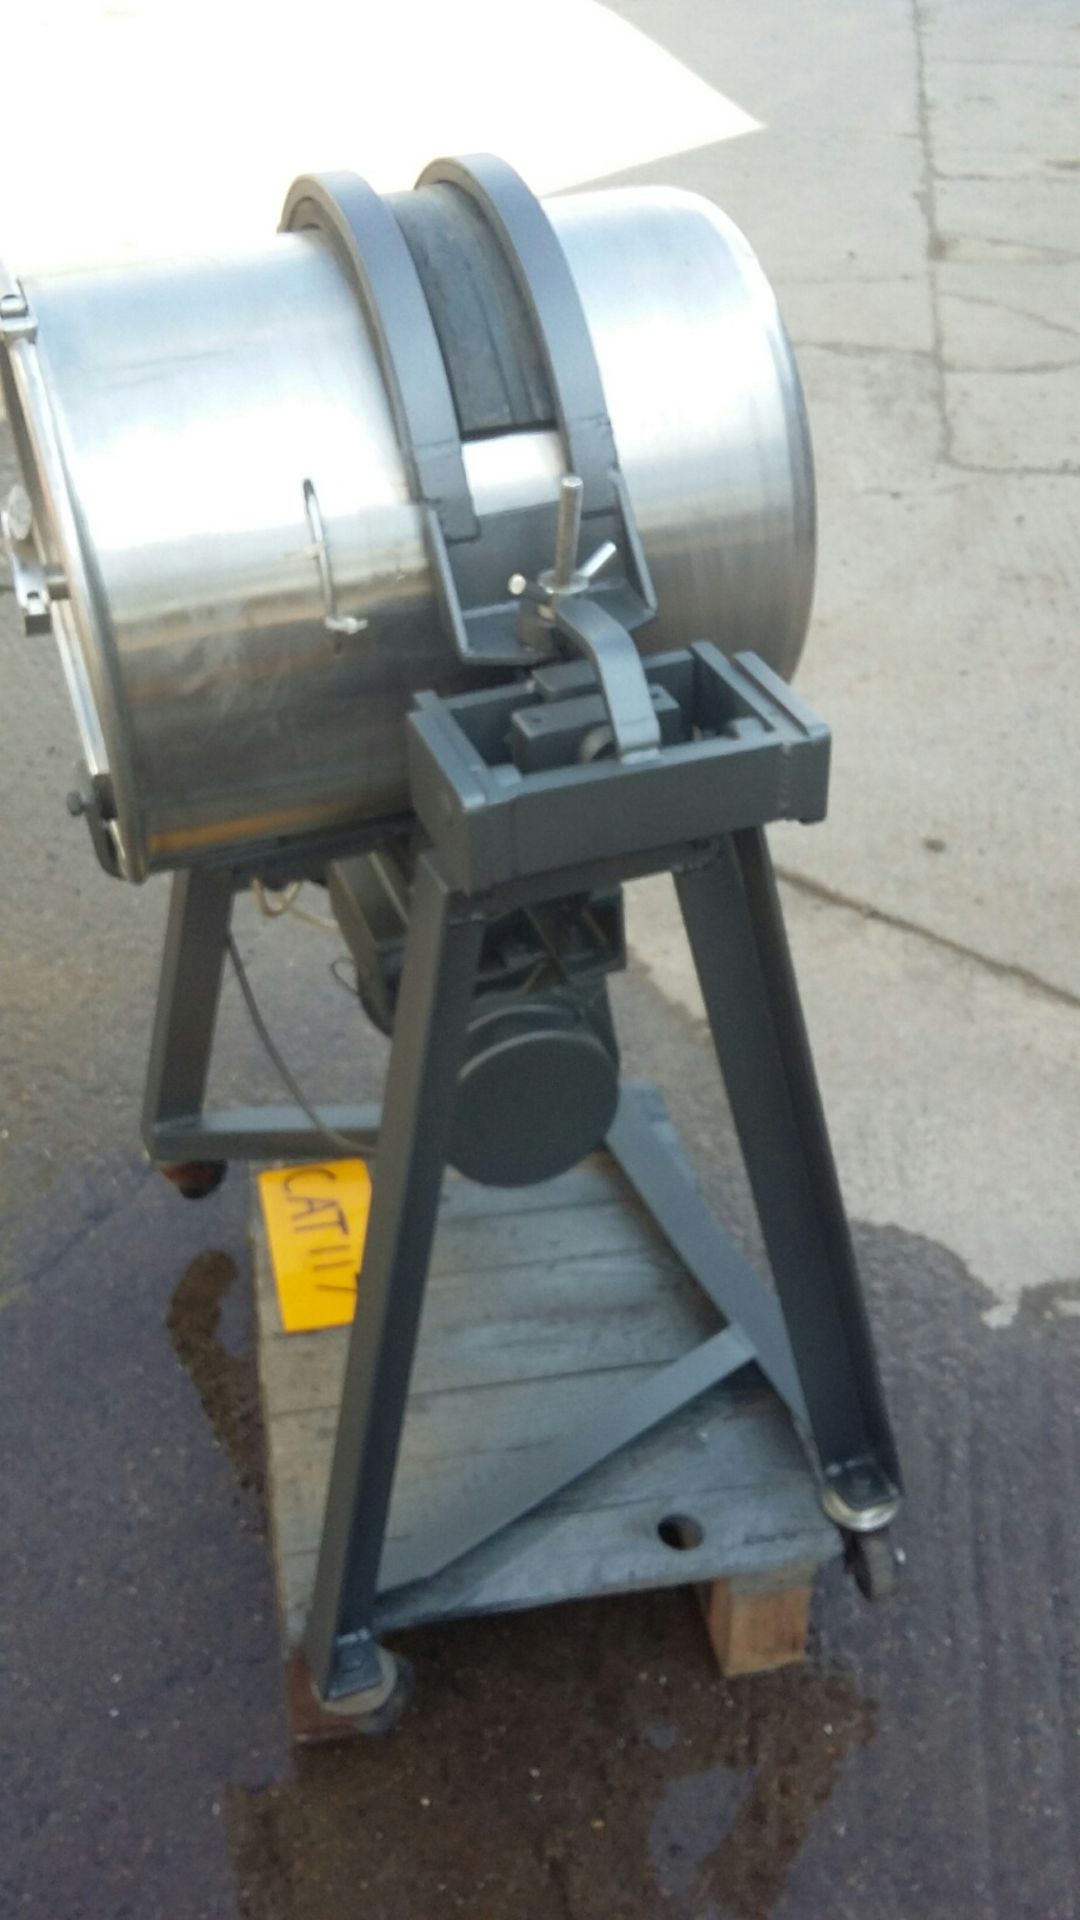 Pascall 1418 Engineering Vibratory Drum Shaker, si - Image 3 of 4